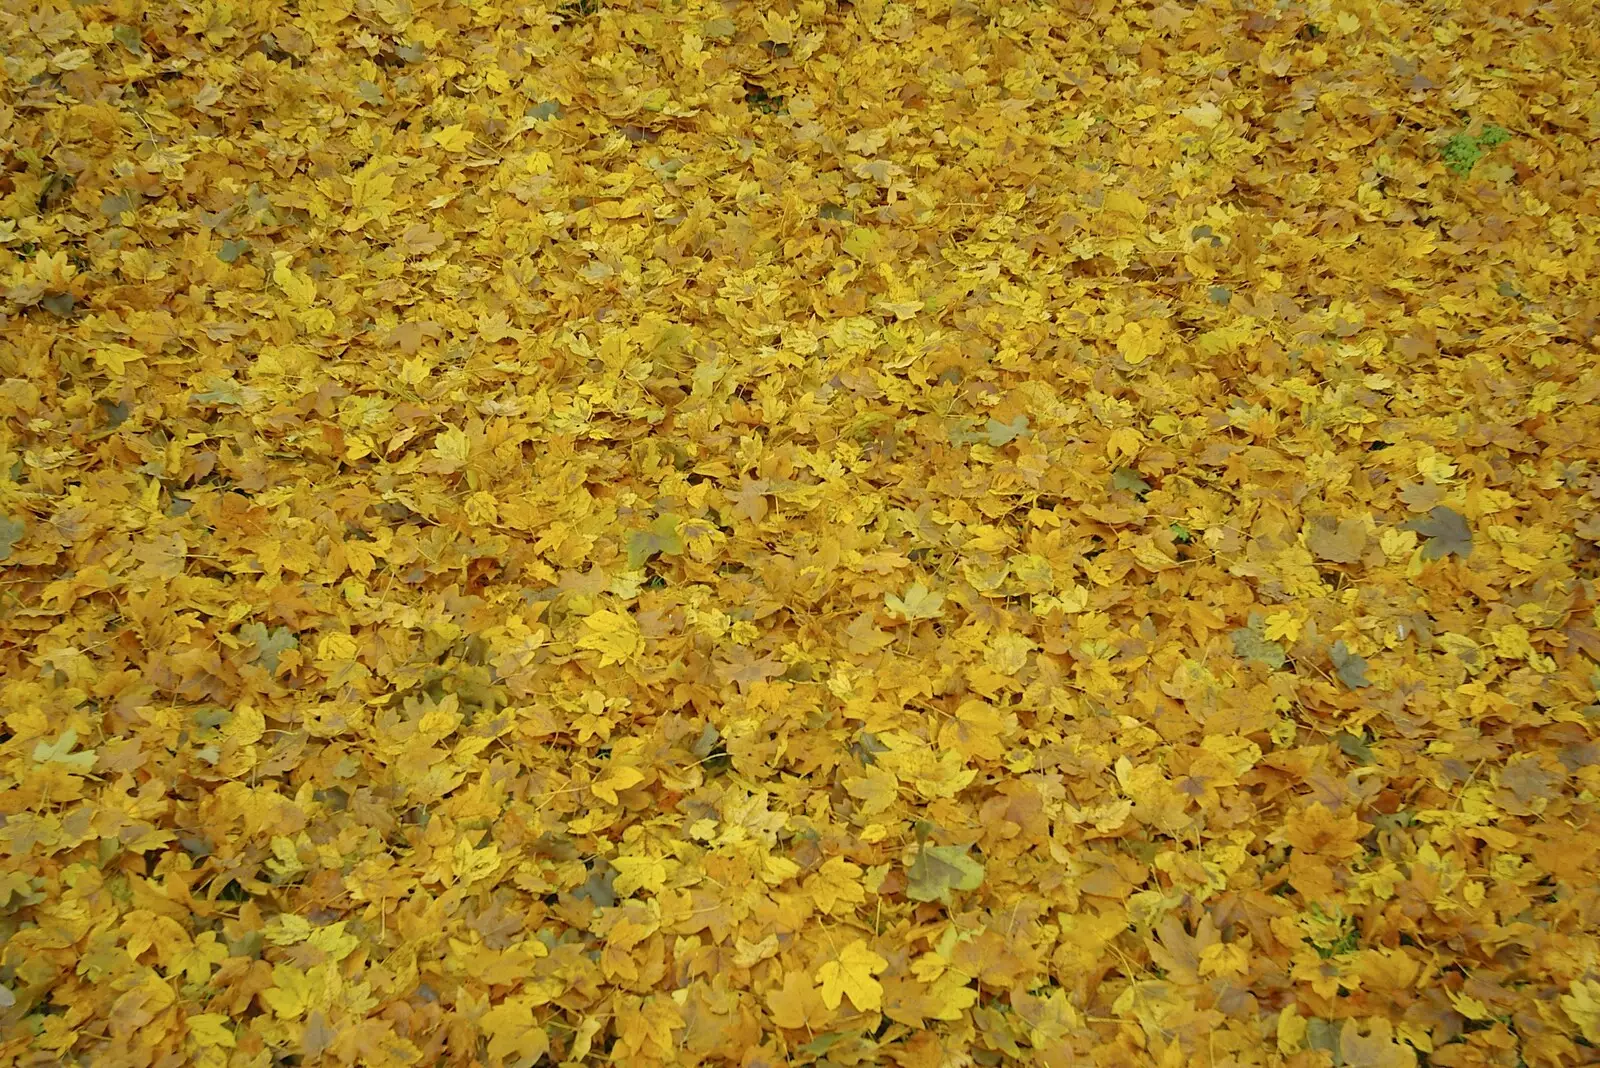 A carpet of golden leaves, from Pheasants, Sunsets and The BBs at Bressingham, Norfolk - 11th December 2005